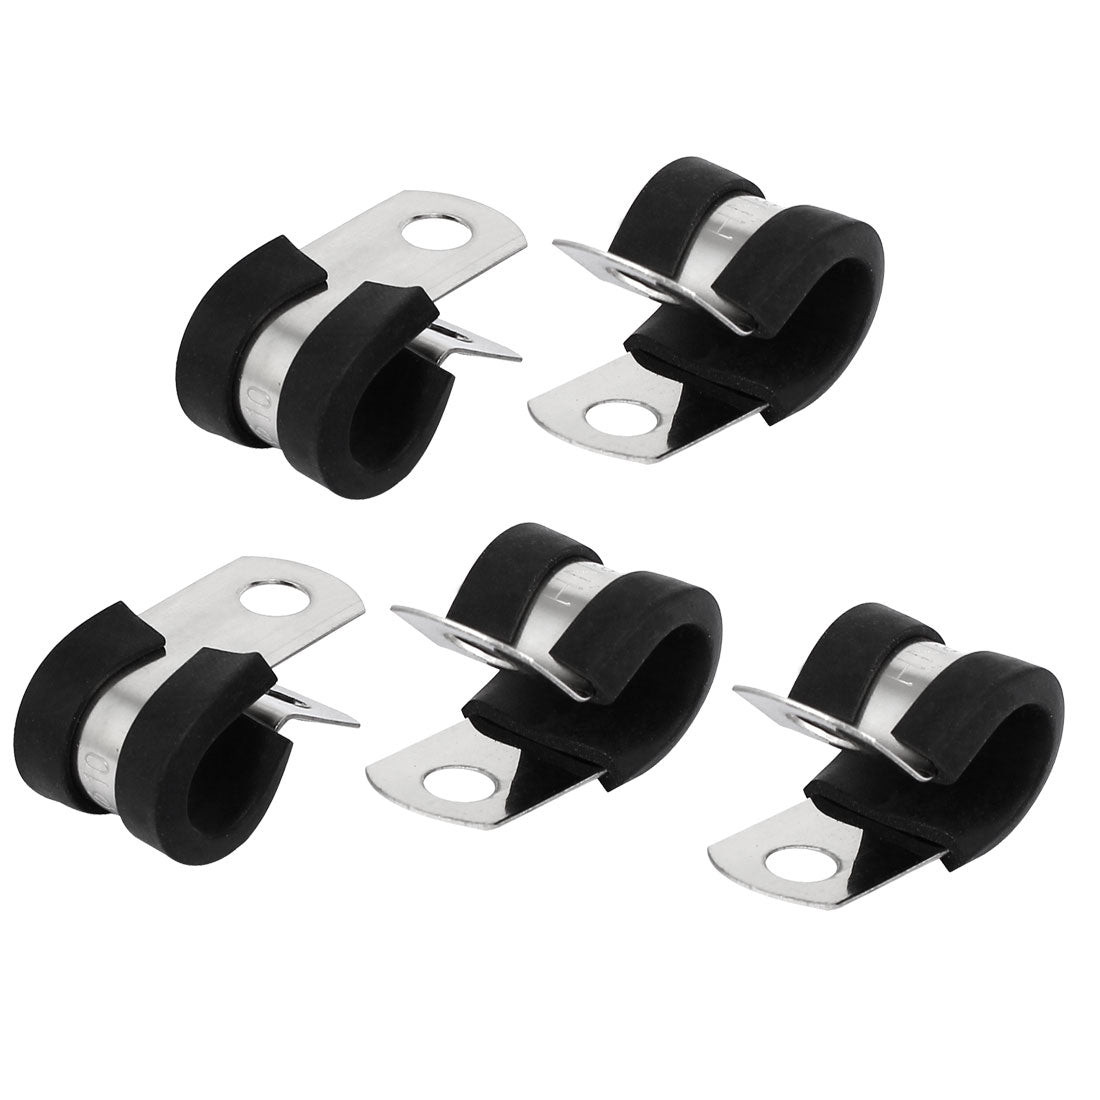 uxcell Uxcell 10mm Dia EPDM Rubber Lined P Clips Cable Hose Pipe Clamps Holder 5pcs